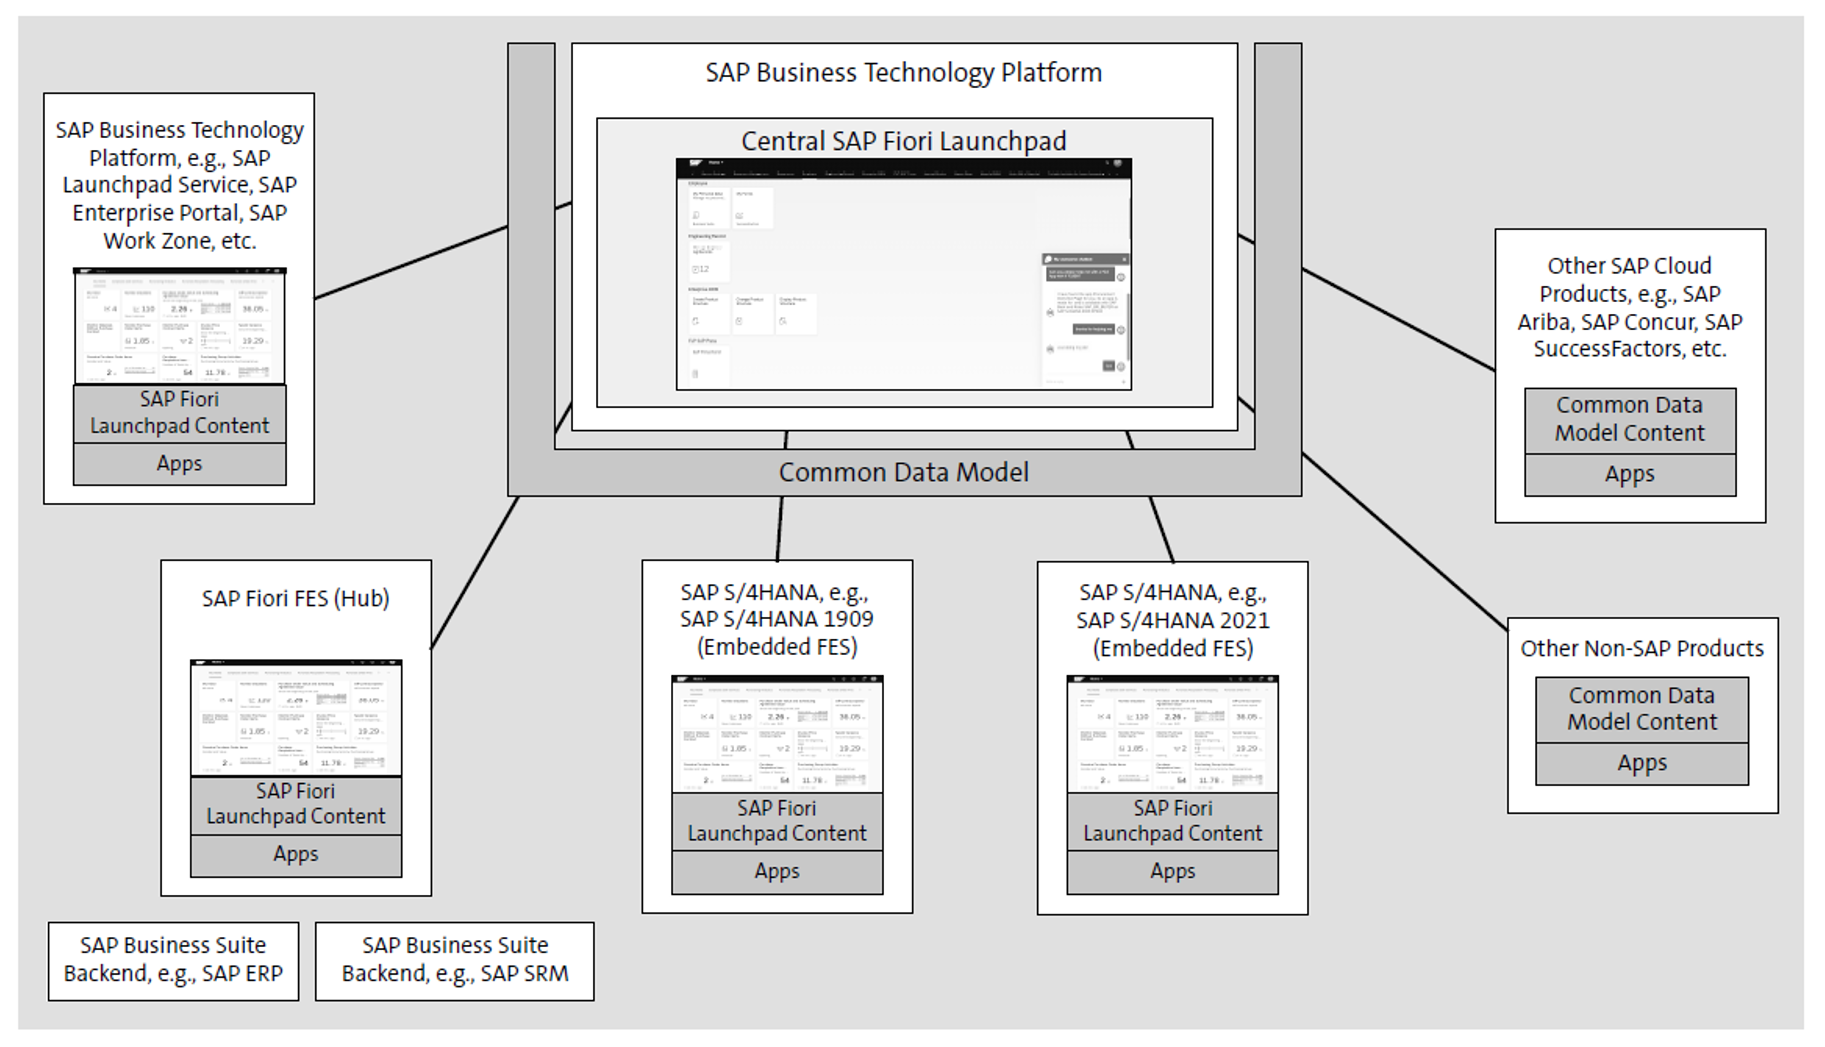 SAP Fiori Launchpad Serving as a Central Entry Point to SAP Business Processes Coverage